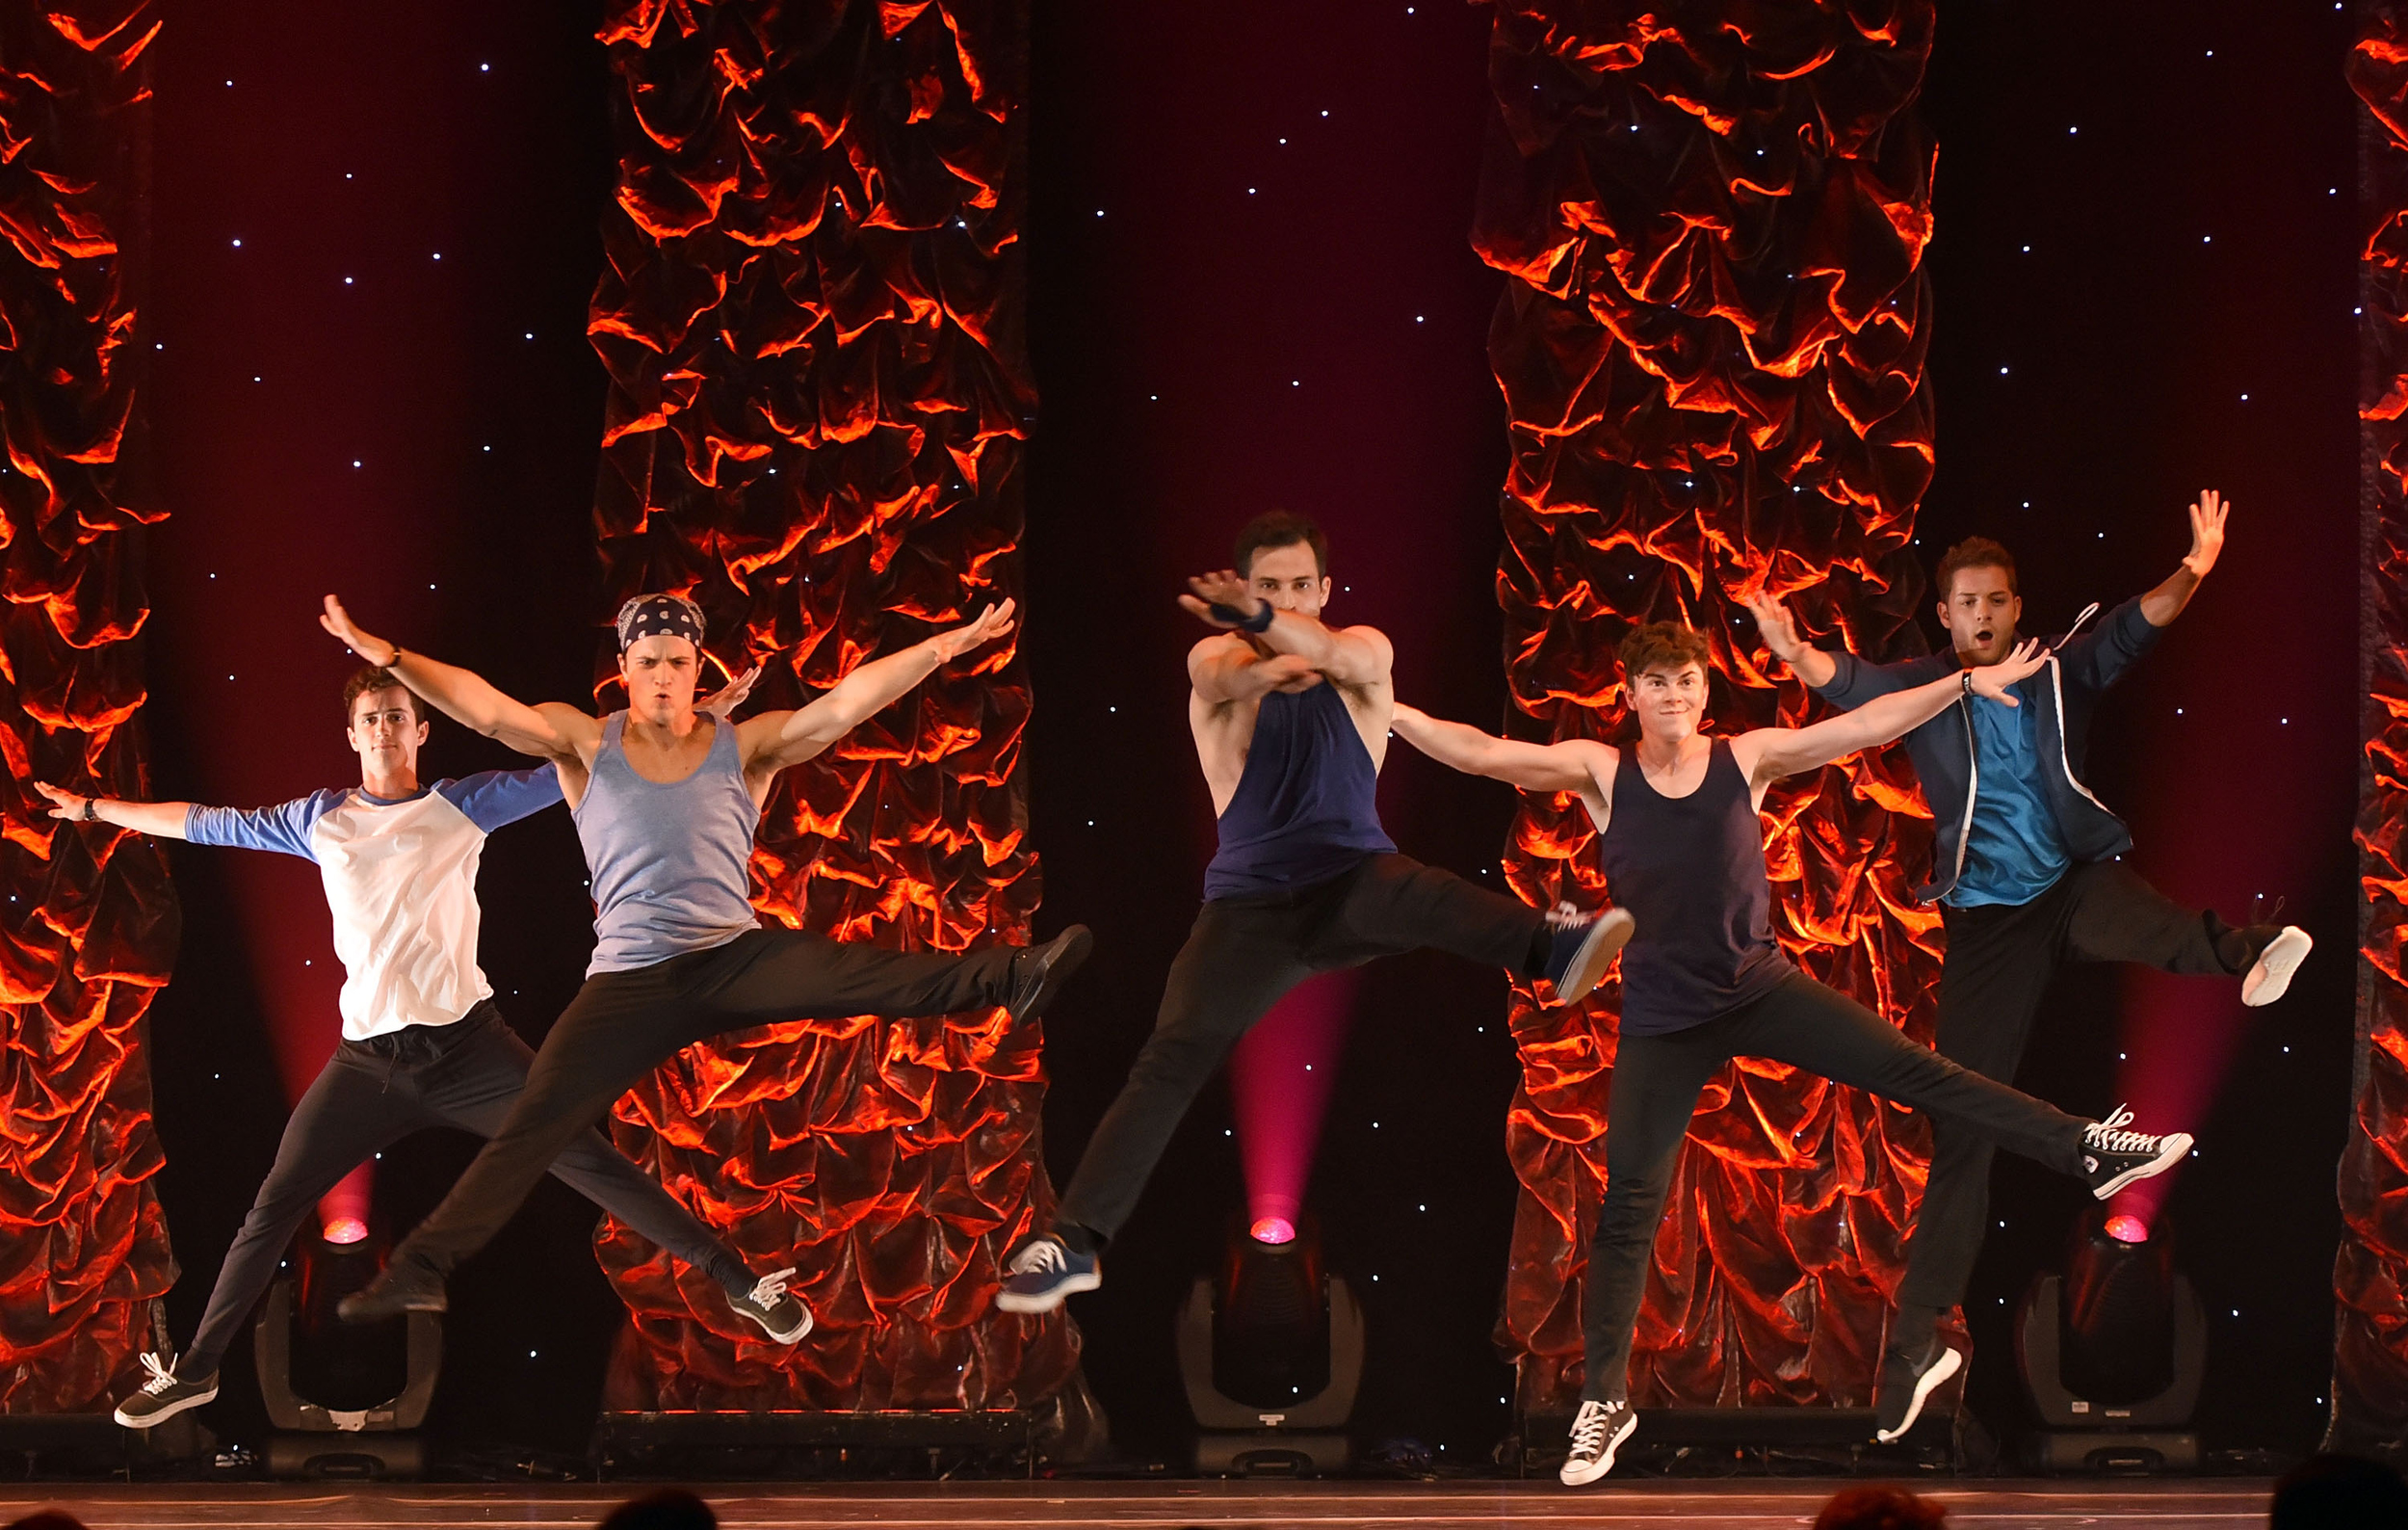   &nbsp;Dancers perform West Side Story Original Prologue onstage at the 5th Annual Celebration of Dance Gala.  